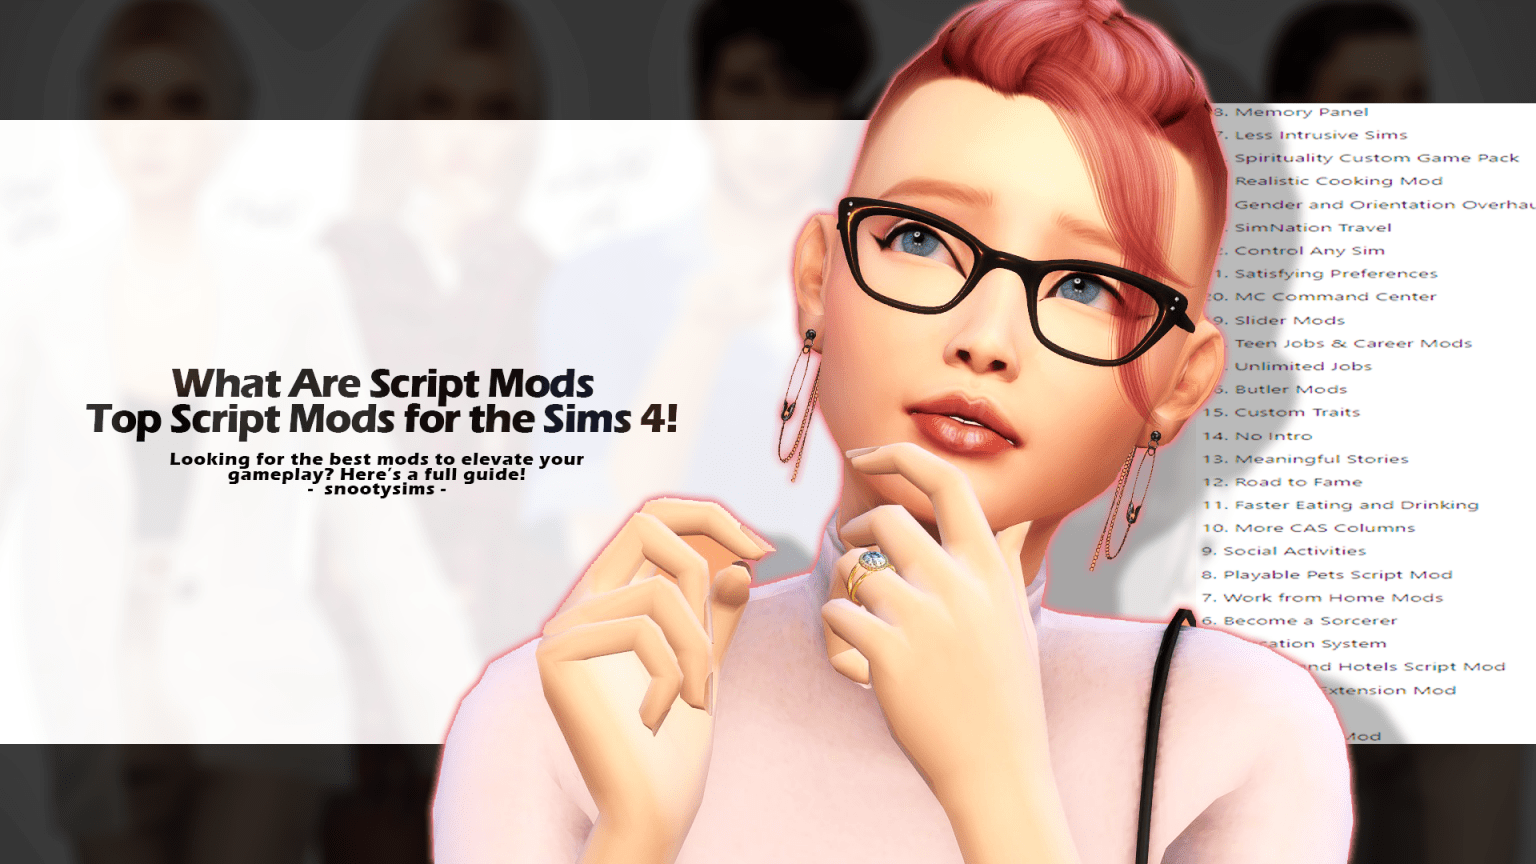 Top Sims 4 Script Mods (What Are Script Mods & How Do They Work